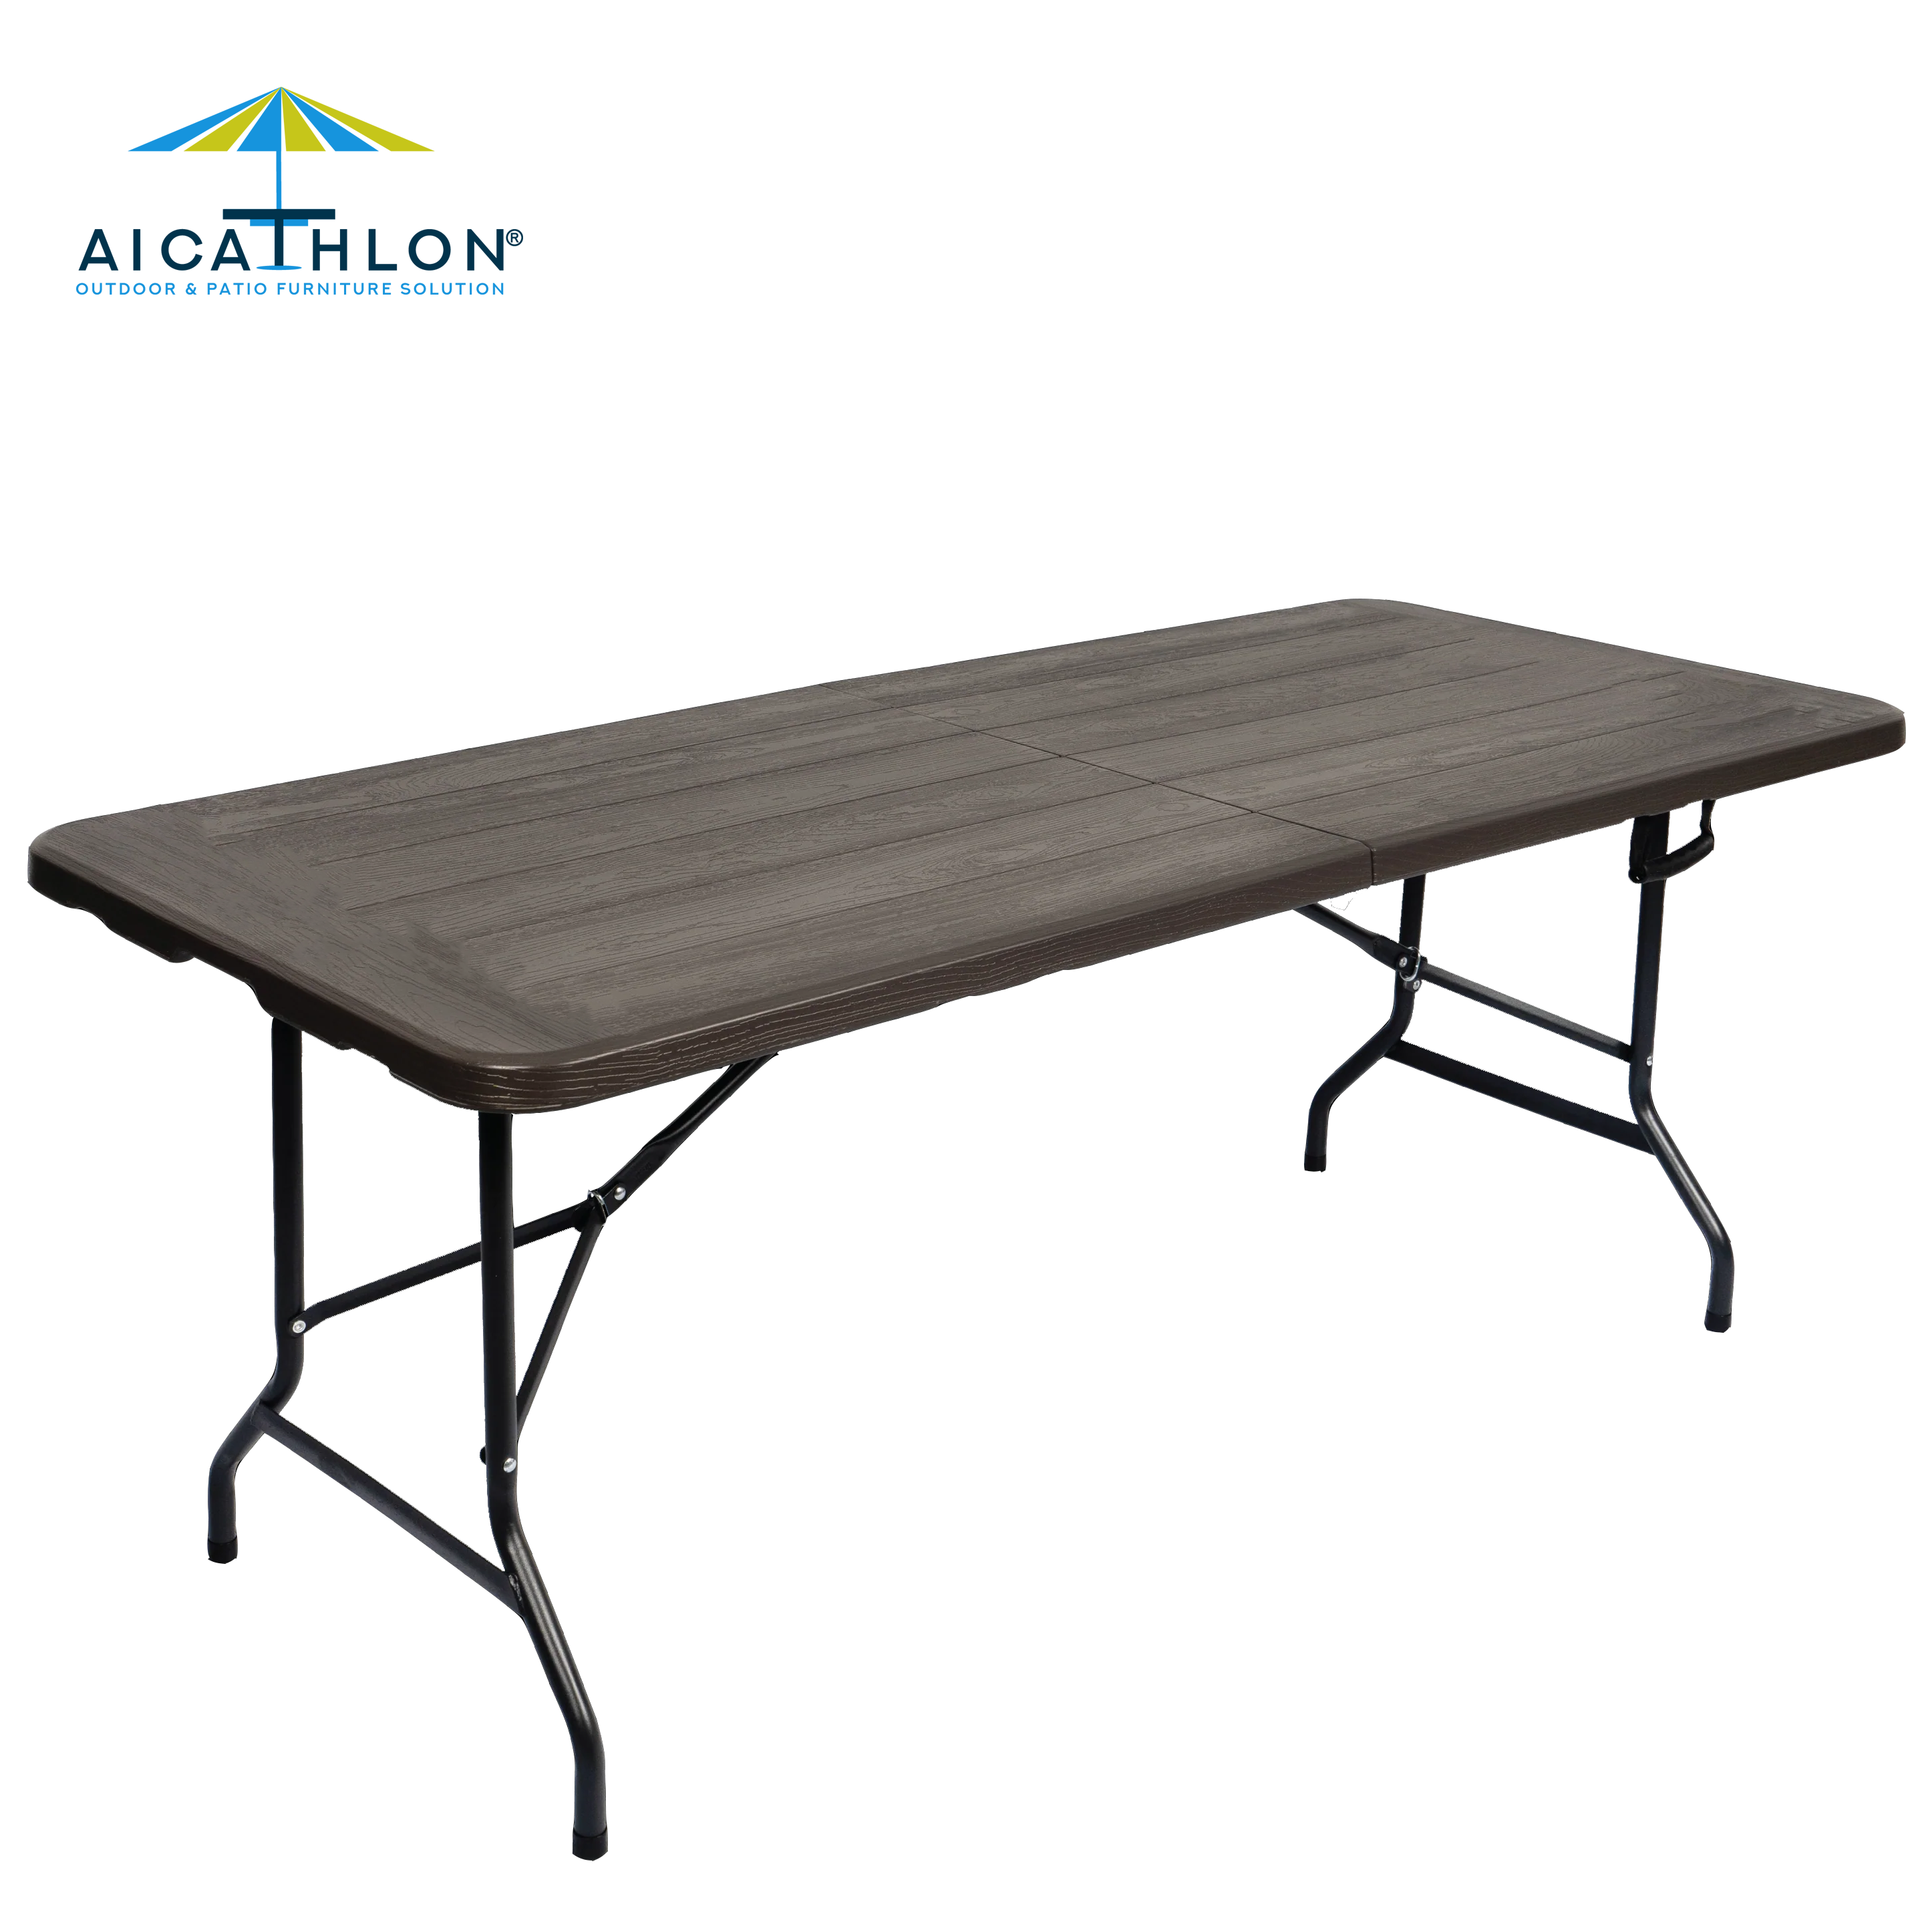 HDPE 6ft Garden Portable Camping Black Wood Grain Plastic Picnic Foldable Outdoor Tables Manufacturer